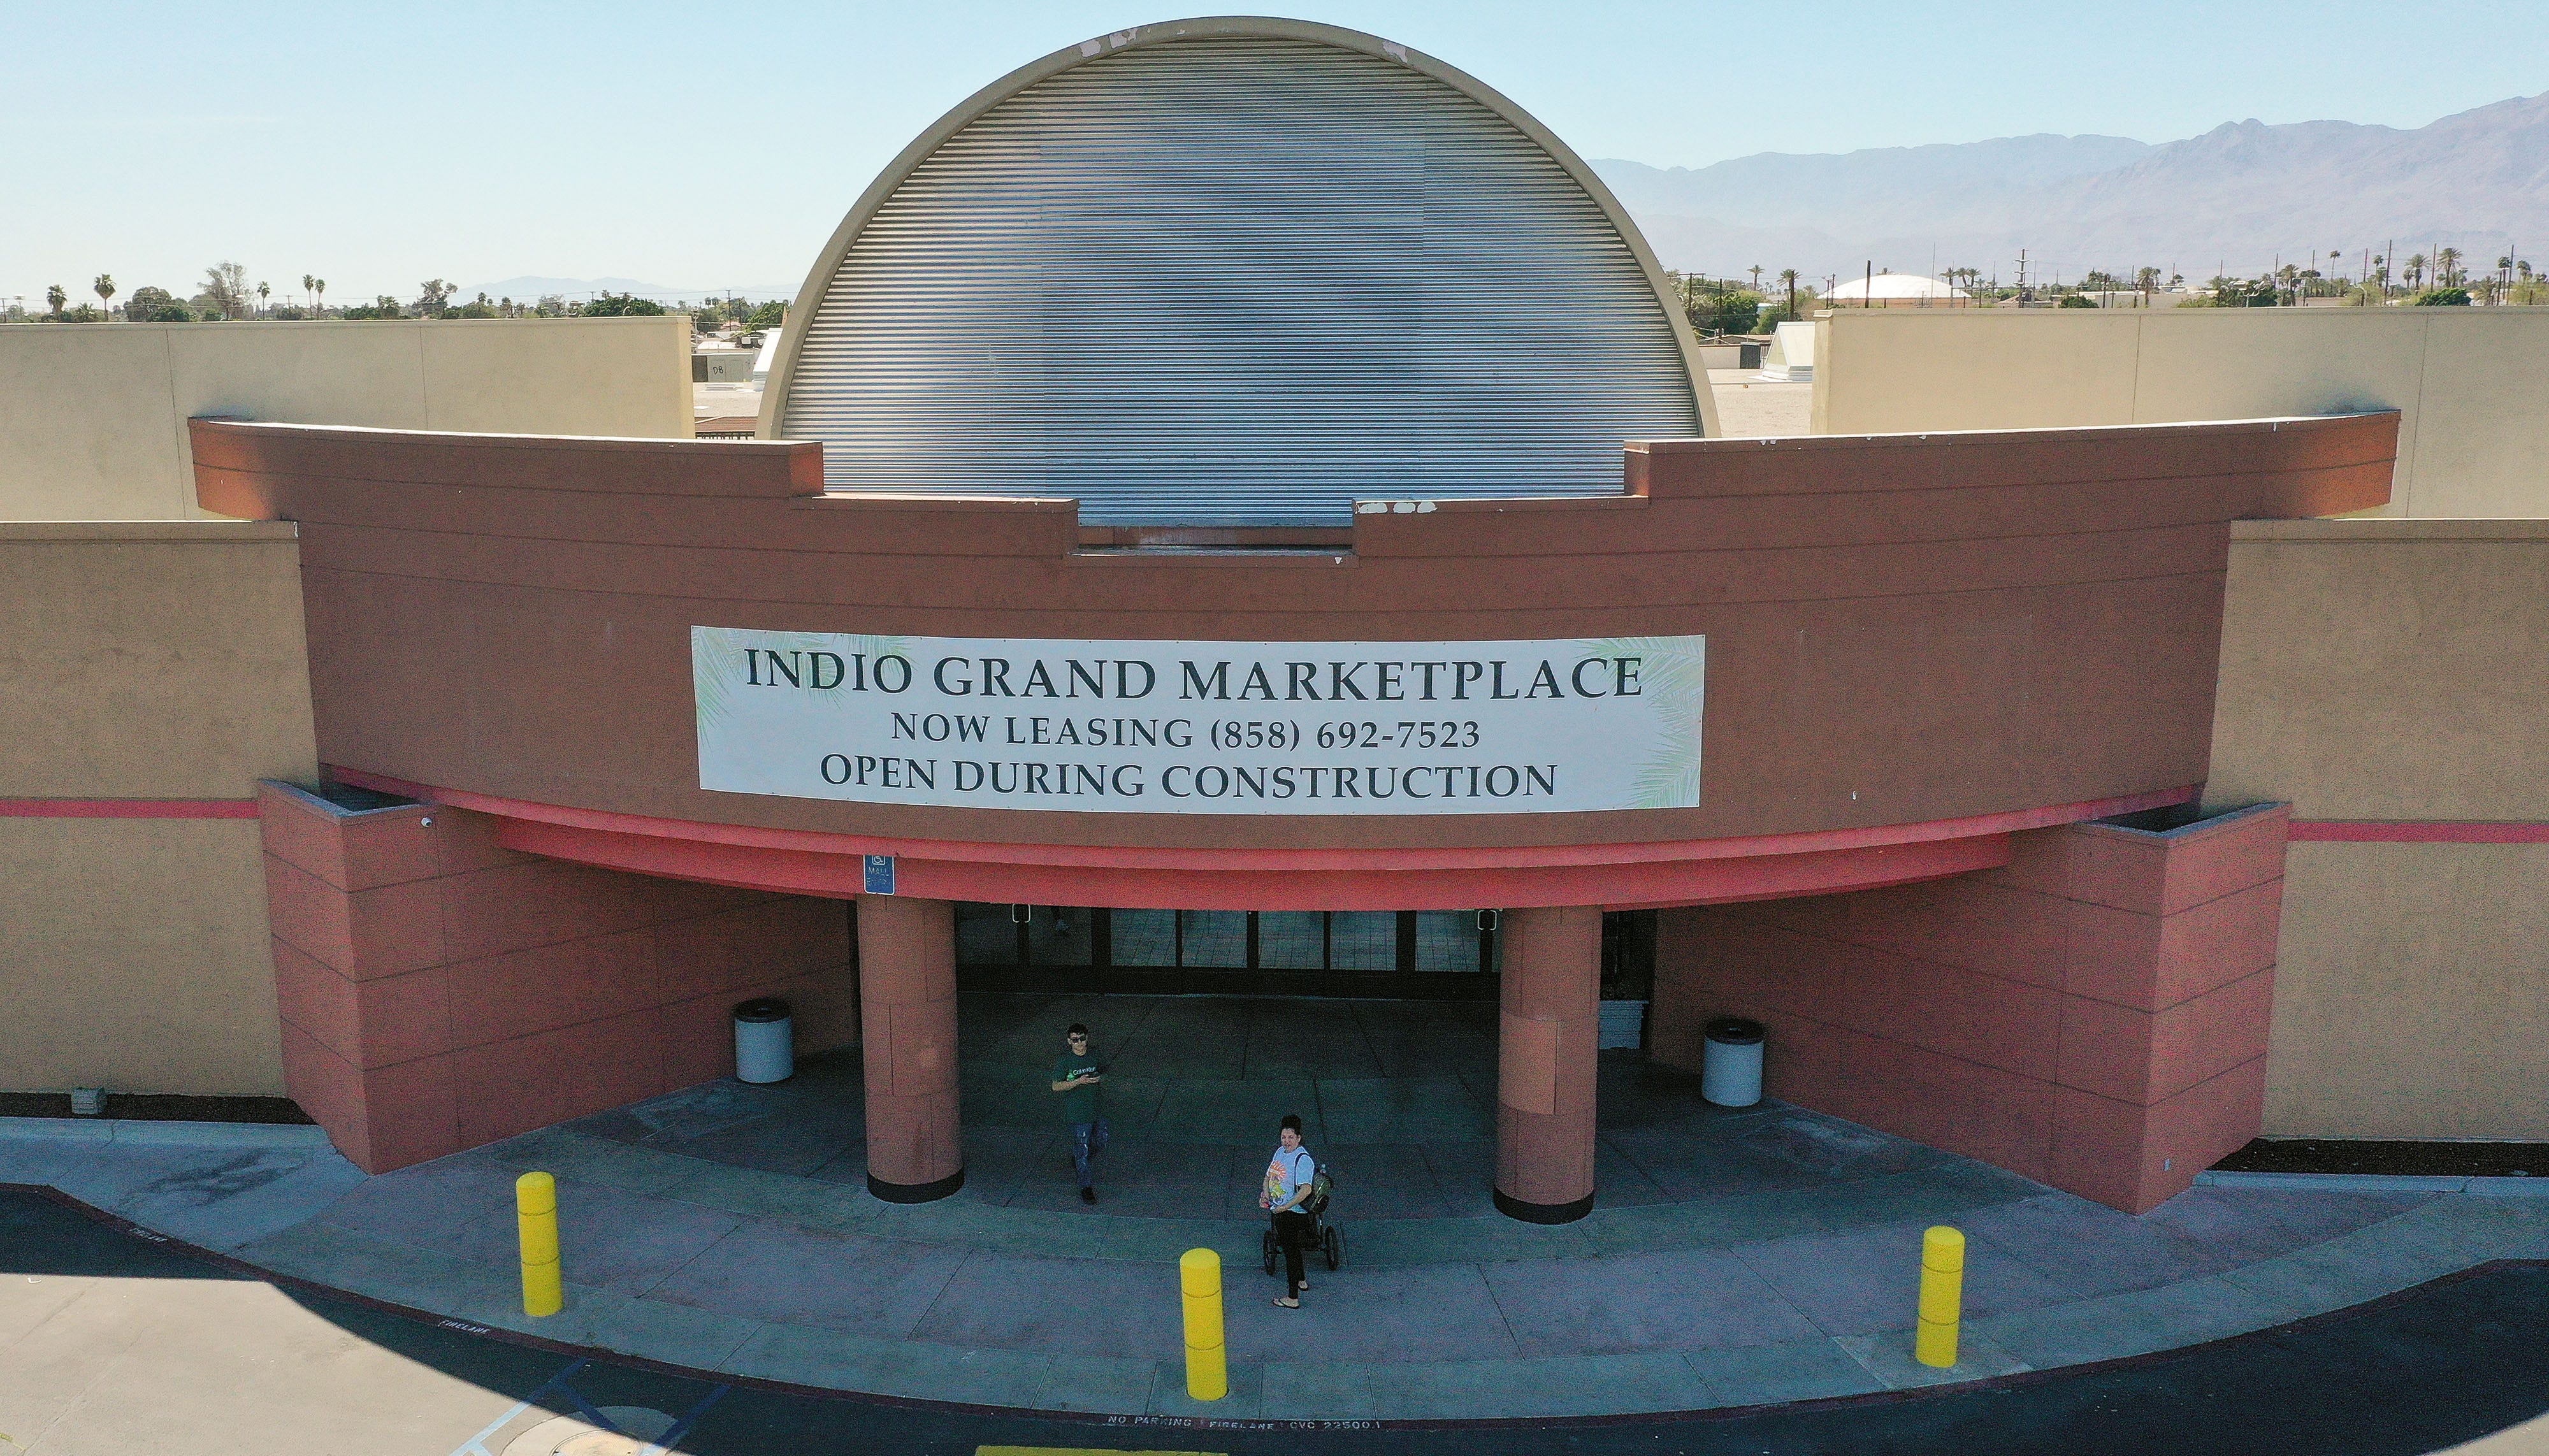 Shoppers come in and out of the main entrance to the Indio Grand Marketplace in Indio, Calif., March 24, 2022.